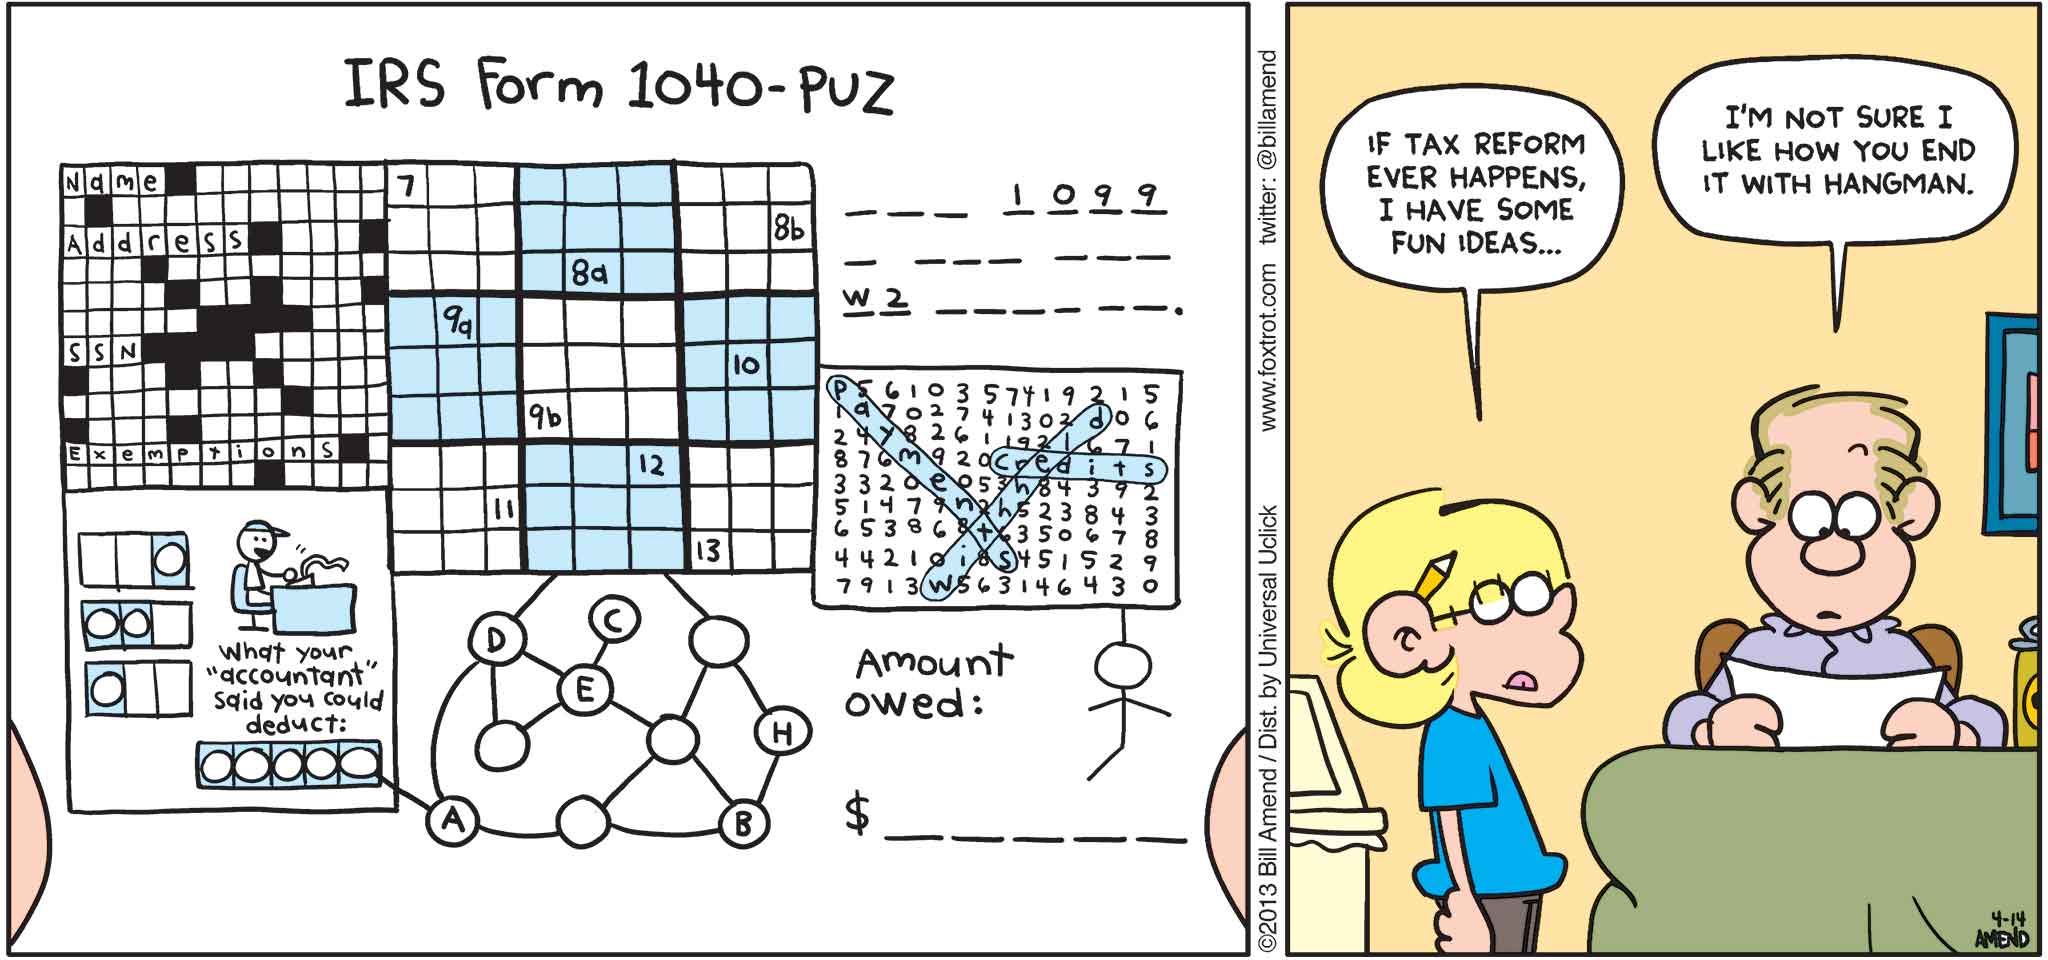 FoxTrot by Bill Amend - published April 14, 2013 - Jason: If tax reform ever happens, I have some fun ideas... Roger: I'm not sure I like how you end it with the hangman.